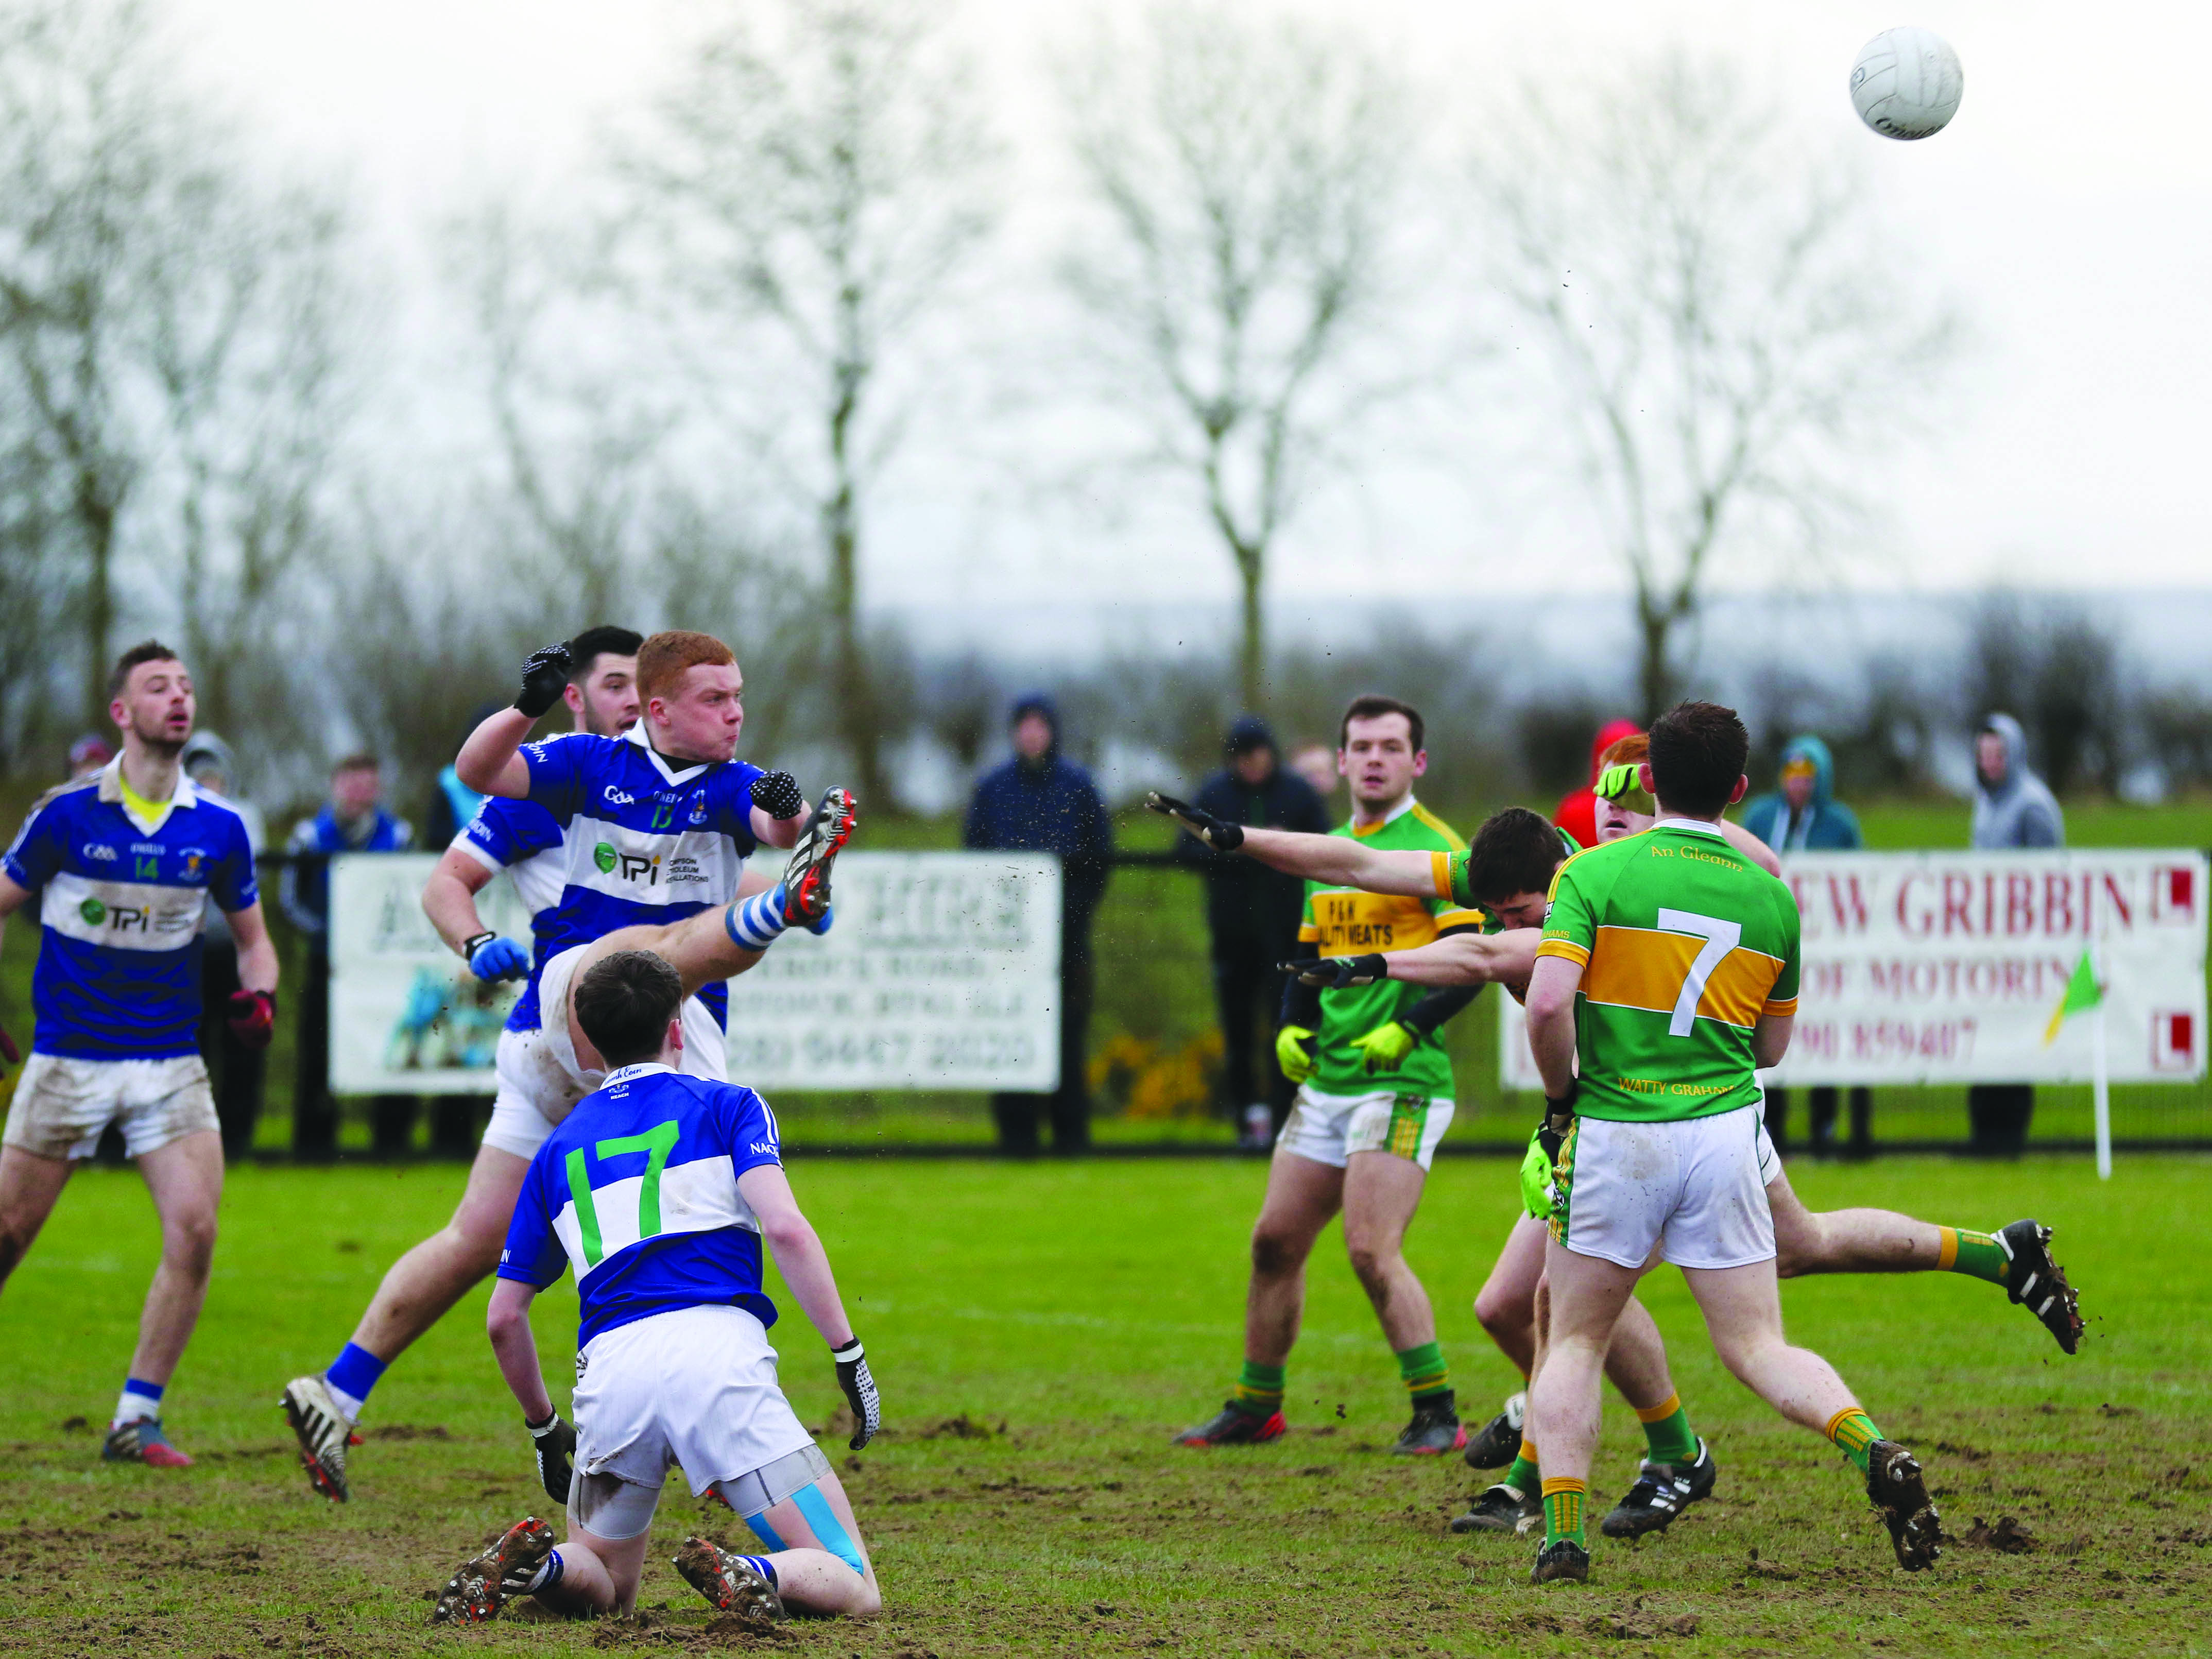 St John’s forward Odhran McKenna gets his shot away as Glen captain Ciaran McFaul attempts to block. The Derry side retained the Paddy McLarnon Cup with an eight-point victory at Creggan on Sunday afternoon.    